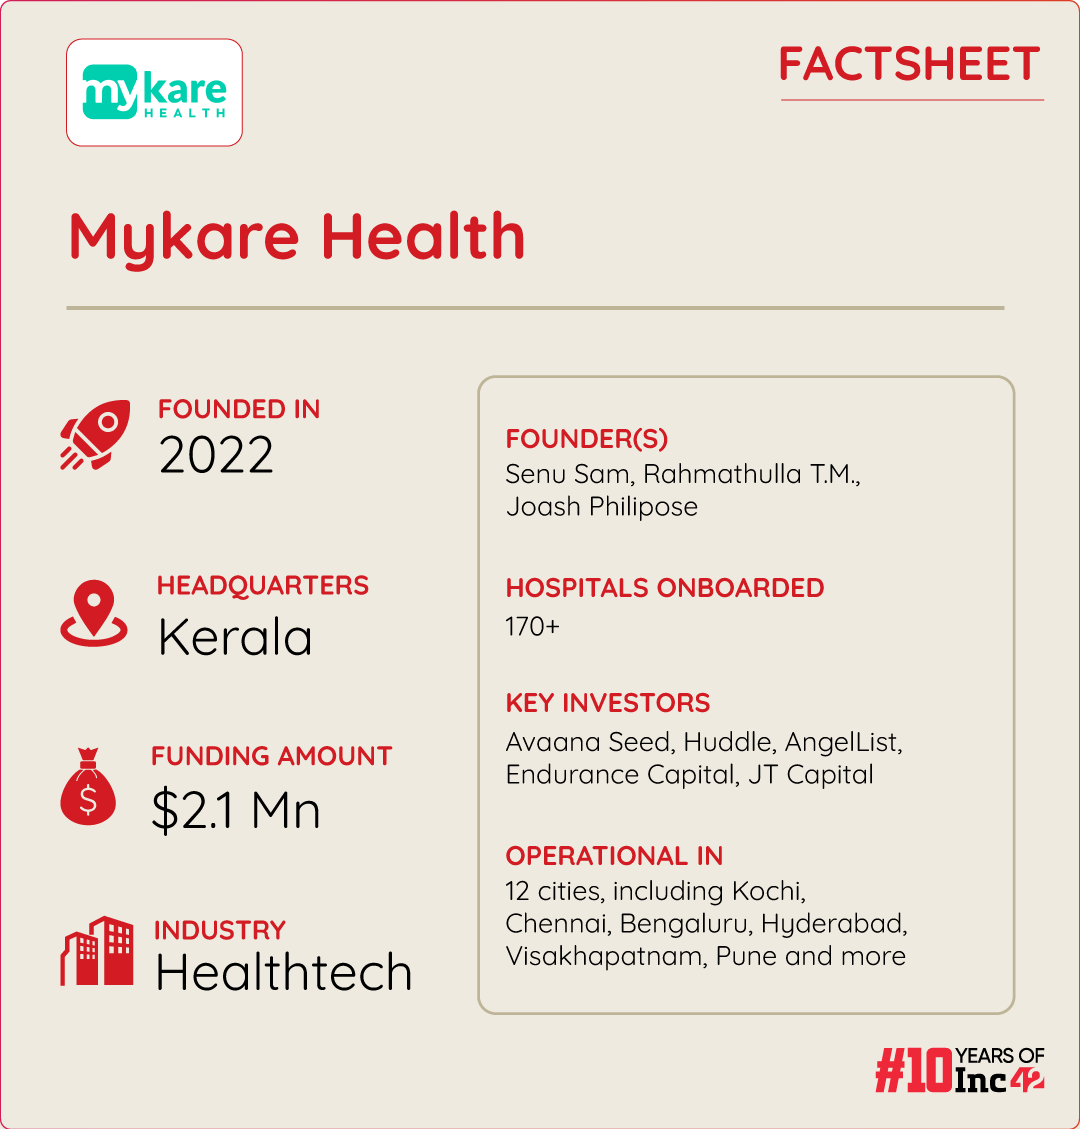 How Mykare Health Is Boosting Patient Footfall & Revenue For 170+ Small & Midsized Hospitals Across India